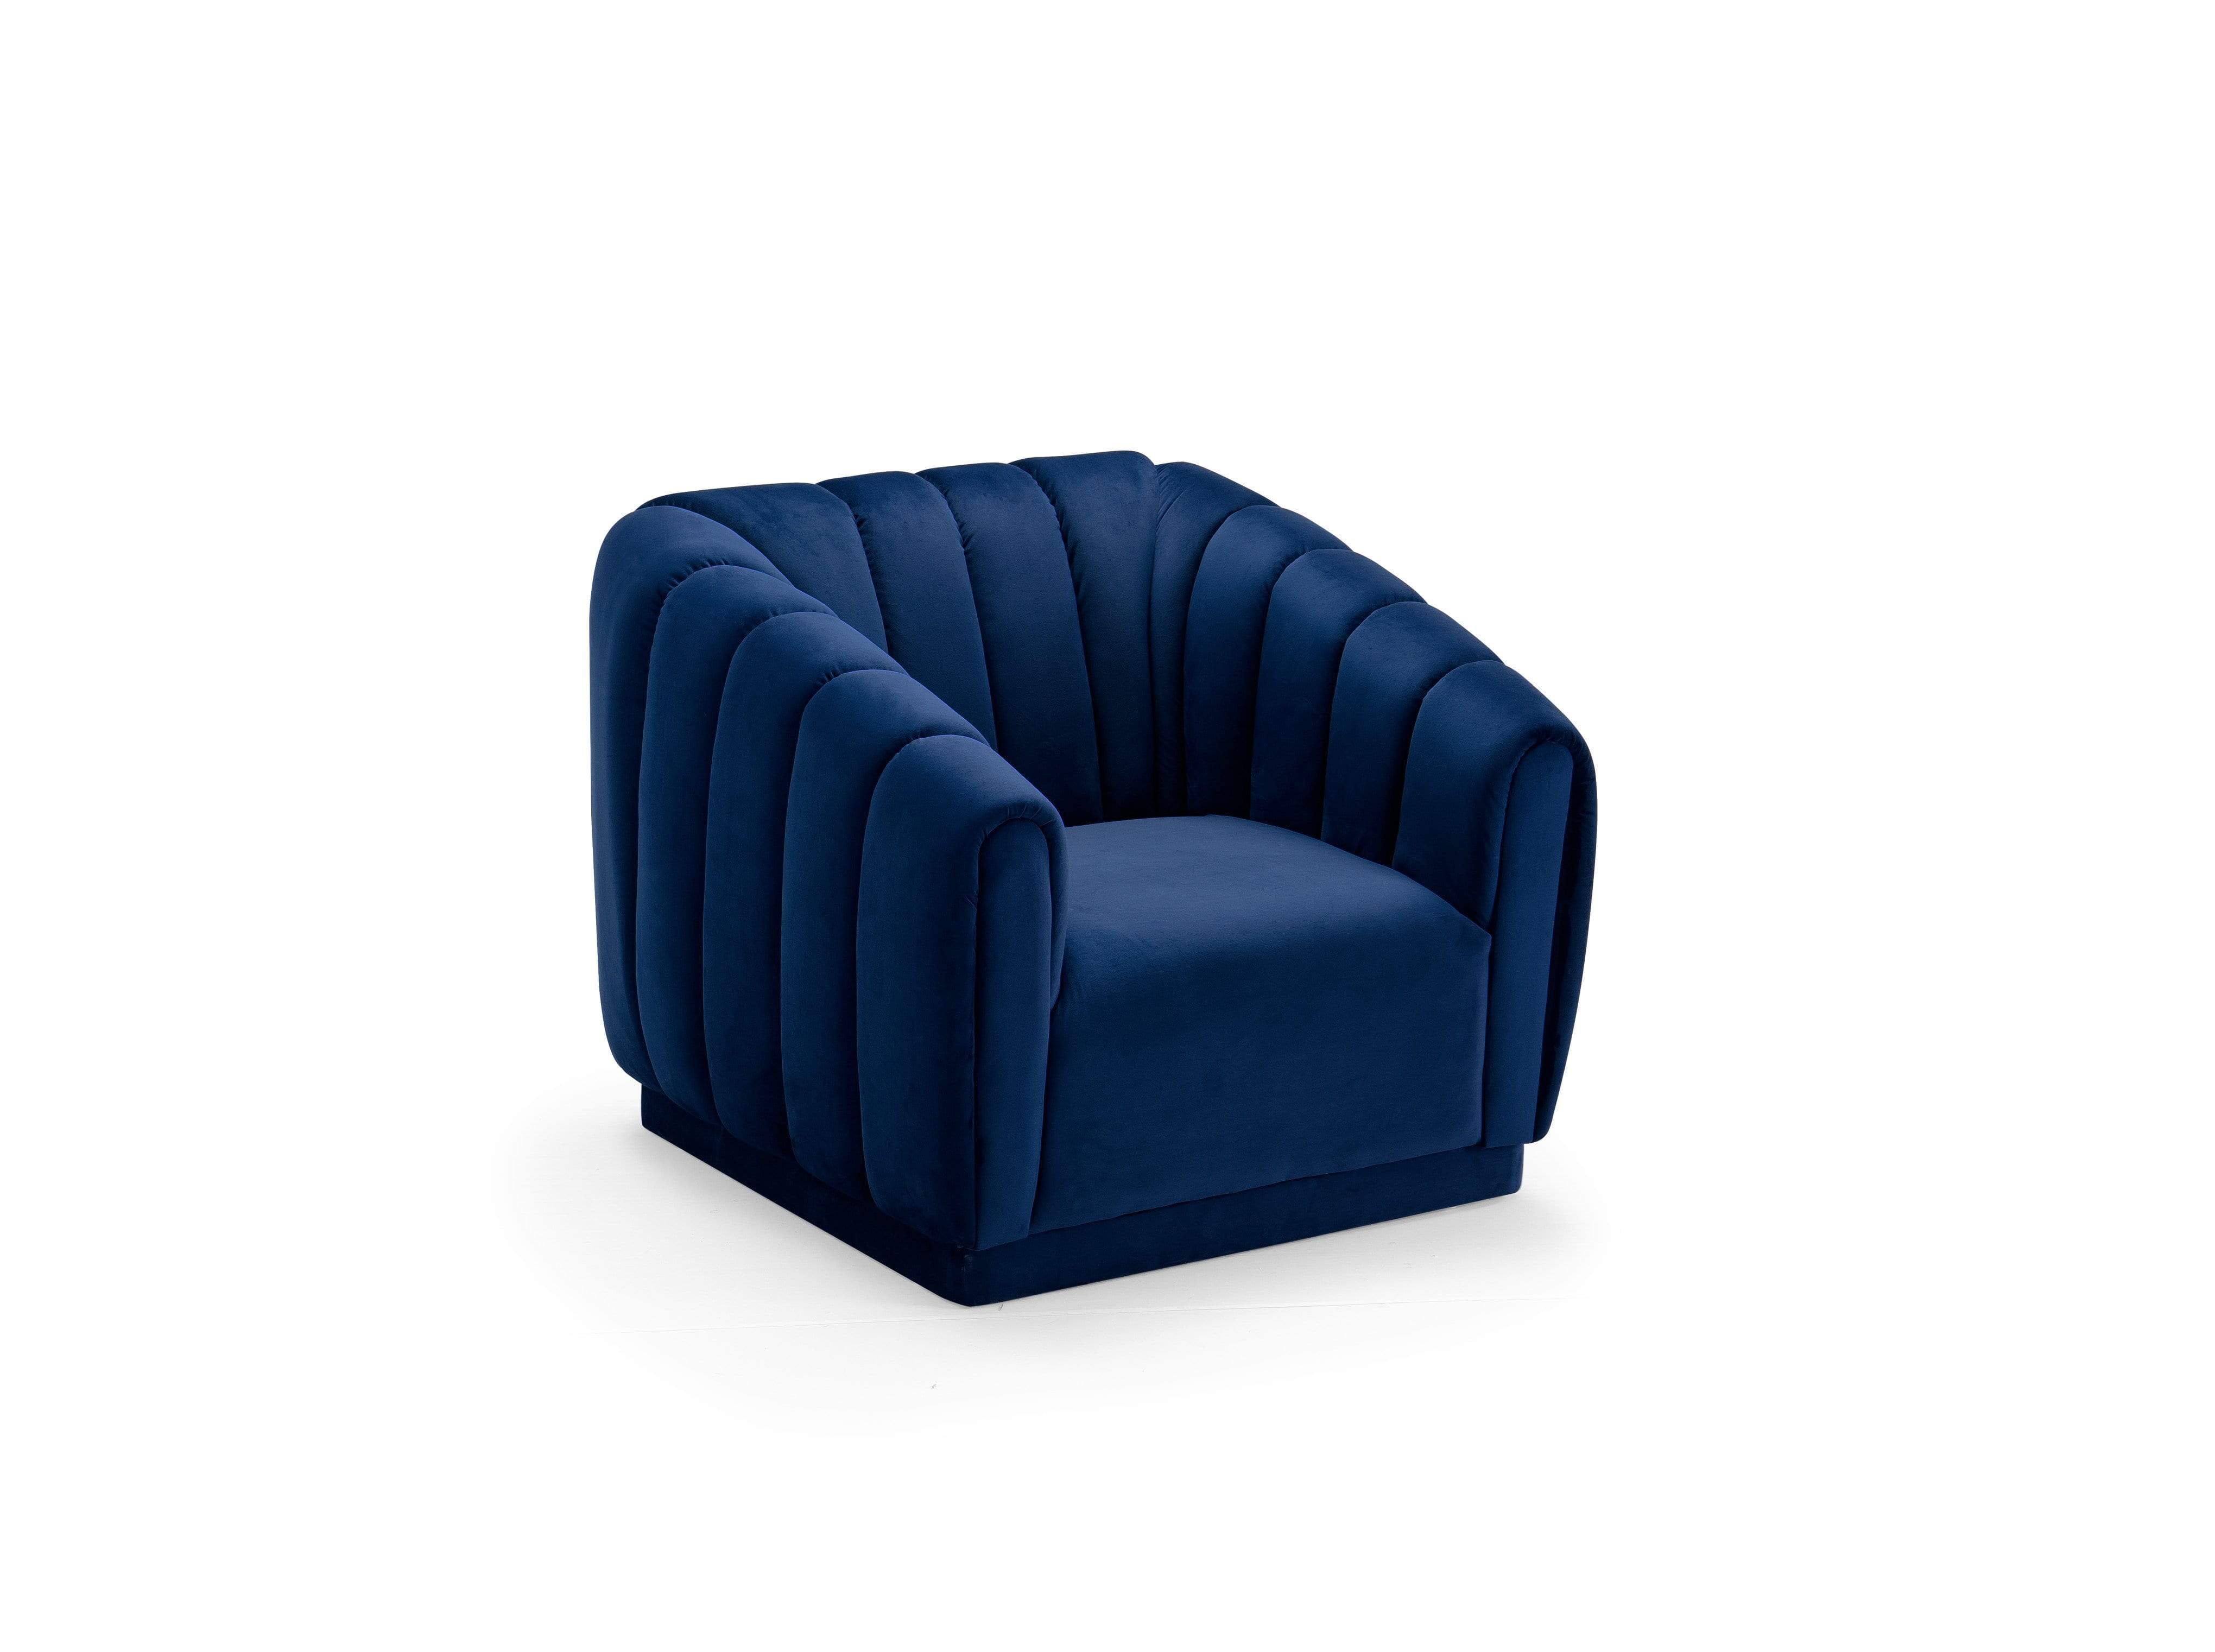 Warhol Channel Quilted Velvet Club Chair